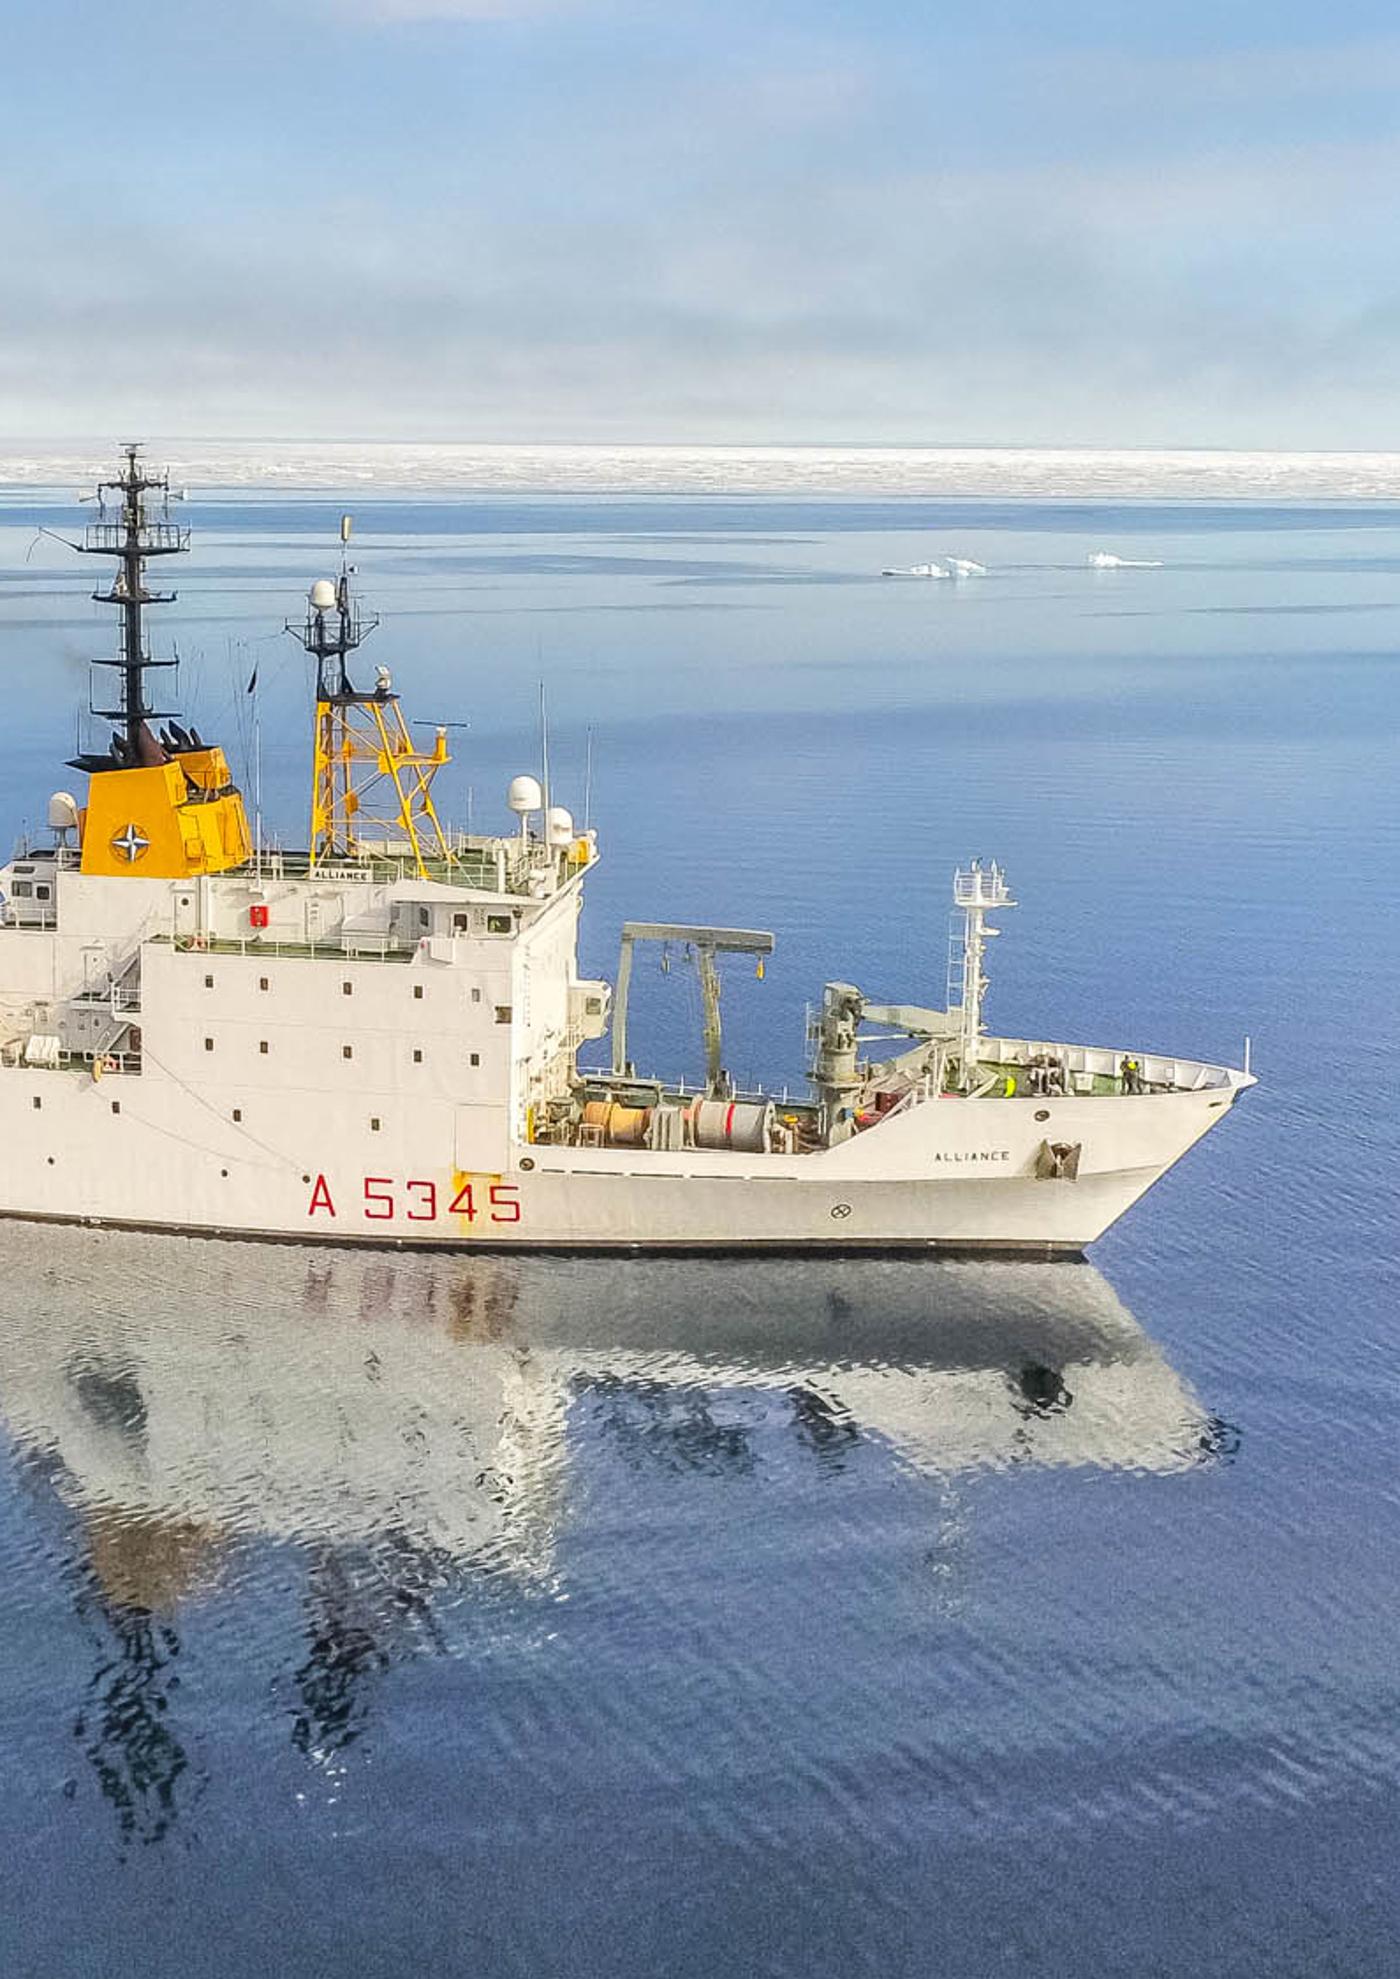 The NRV Alliance operating at the sea ice margin during the NREP23/ACO23 sea trial in July 2021. © NATO STO-CMRE
)